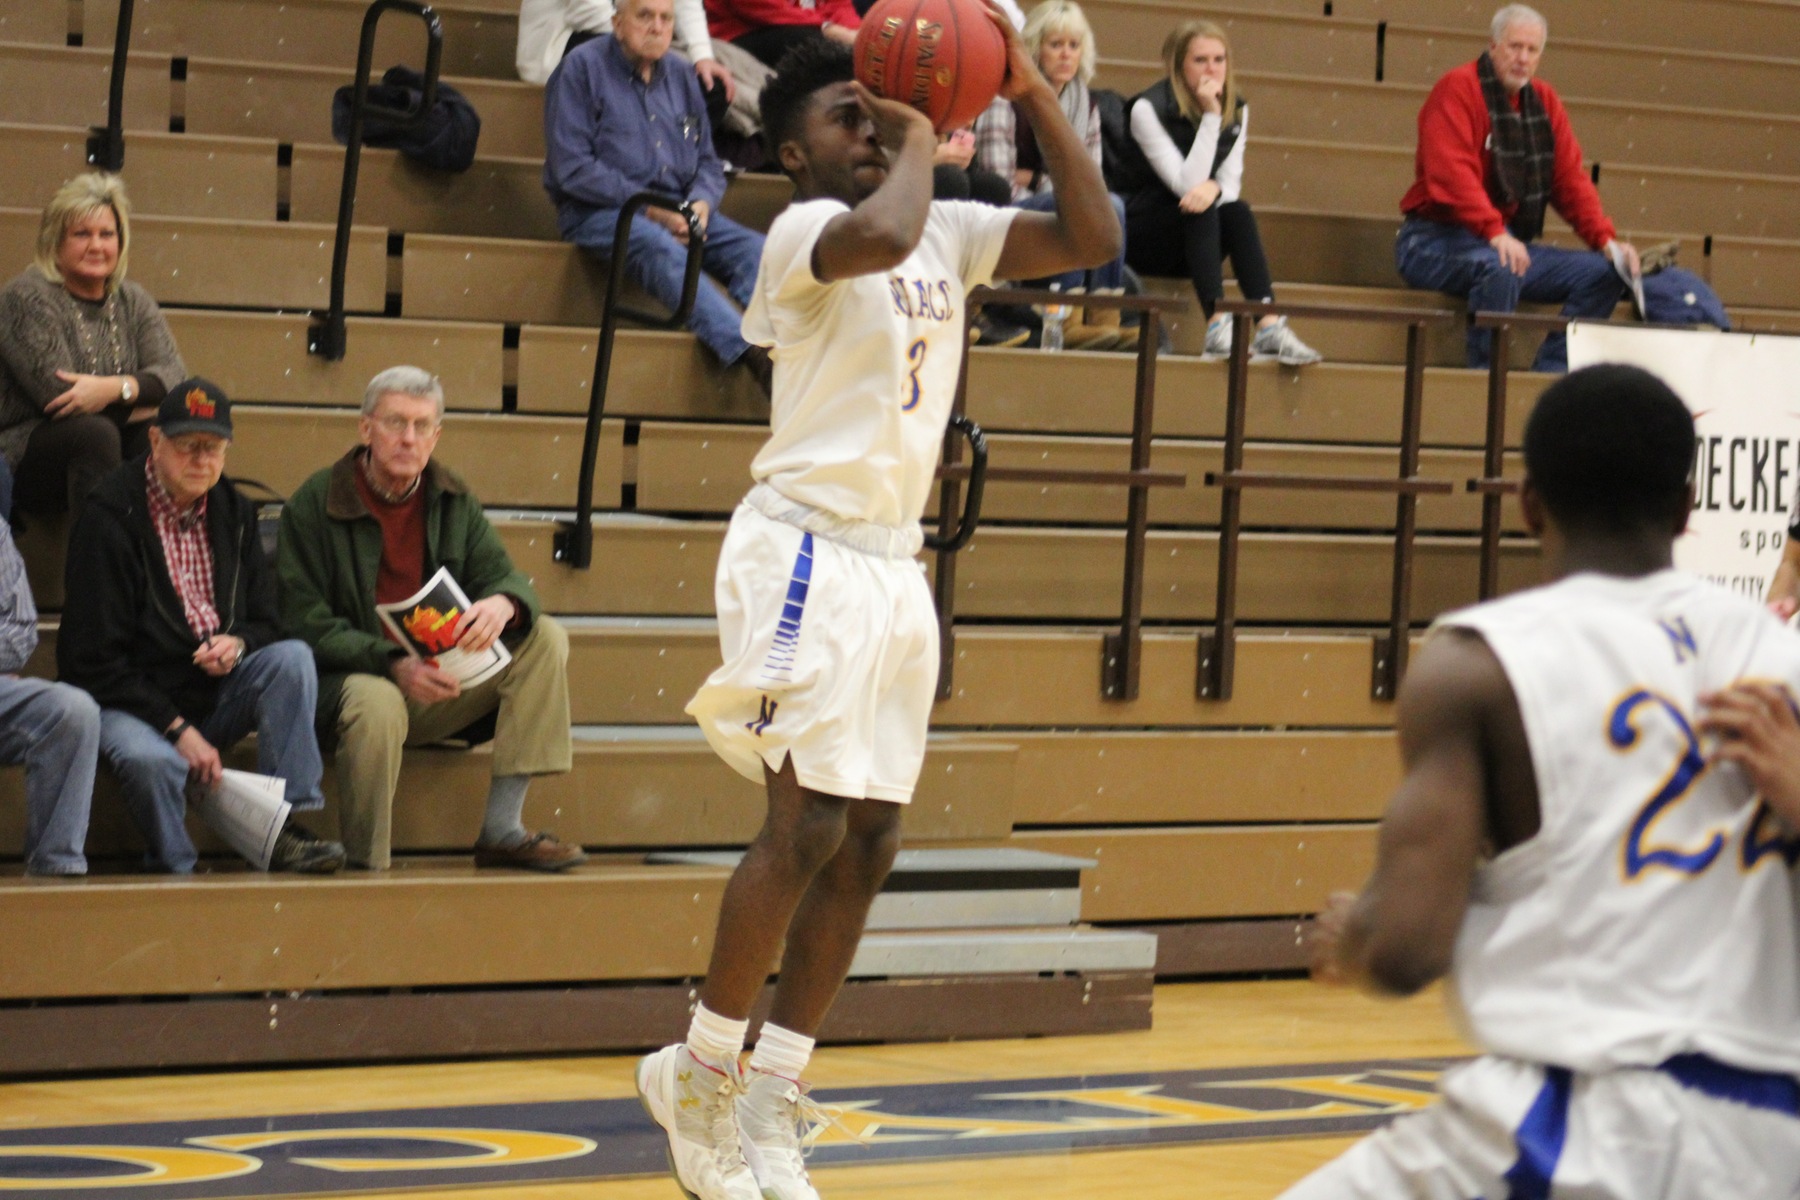 NIACC's Ben Moss ranks seventh in the ICCAC in scoring averaging 13.6 points per game.